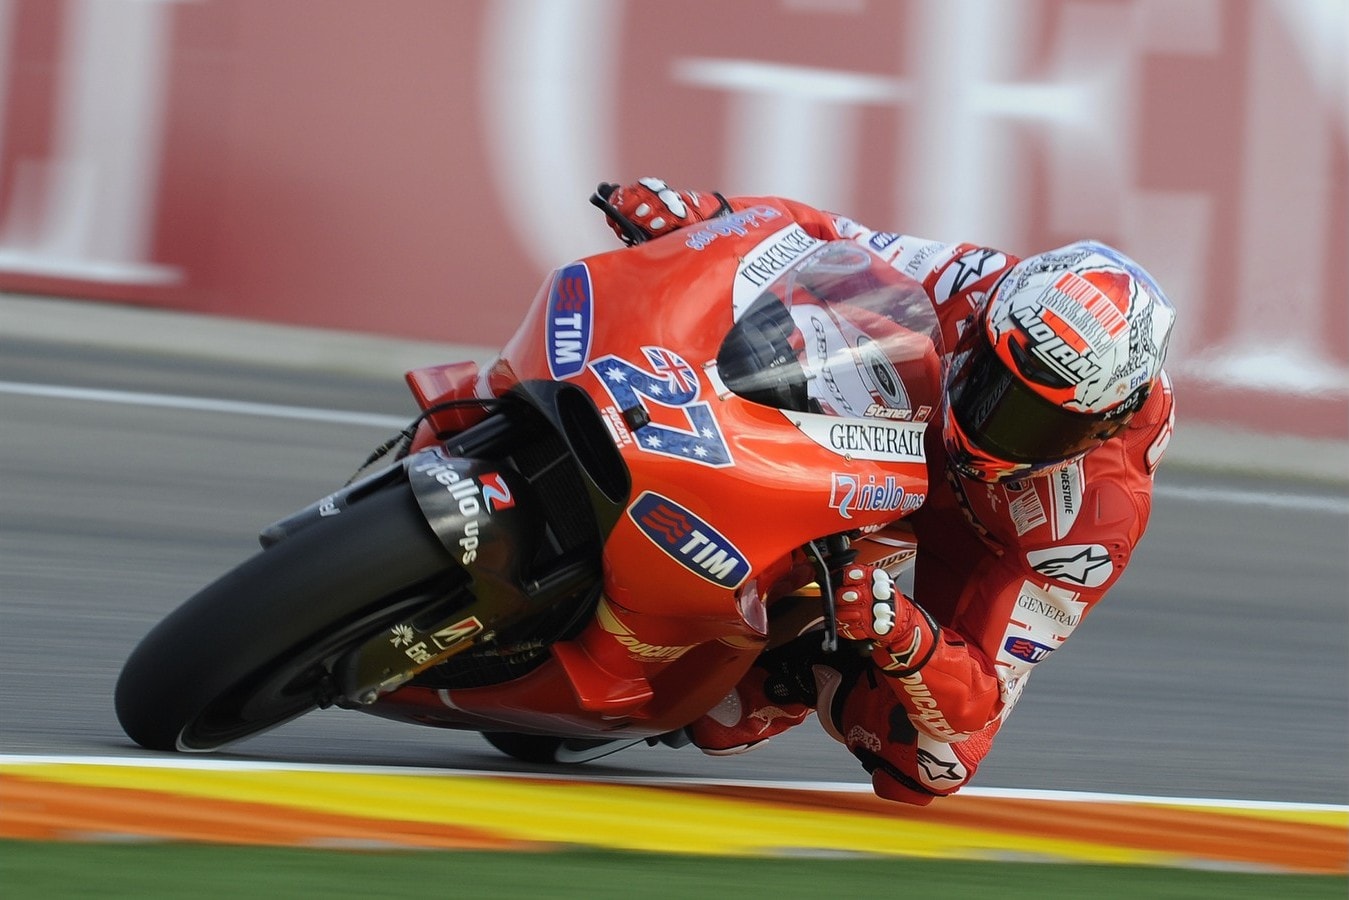 Casey Stoner to Decide on a MotoGP Race After the First Tests